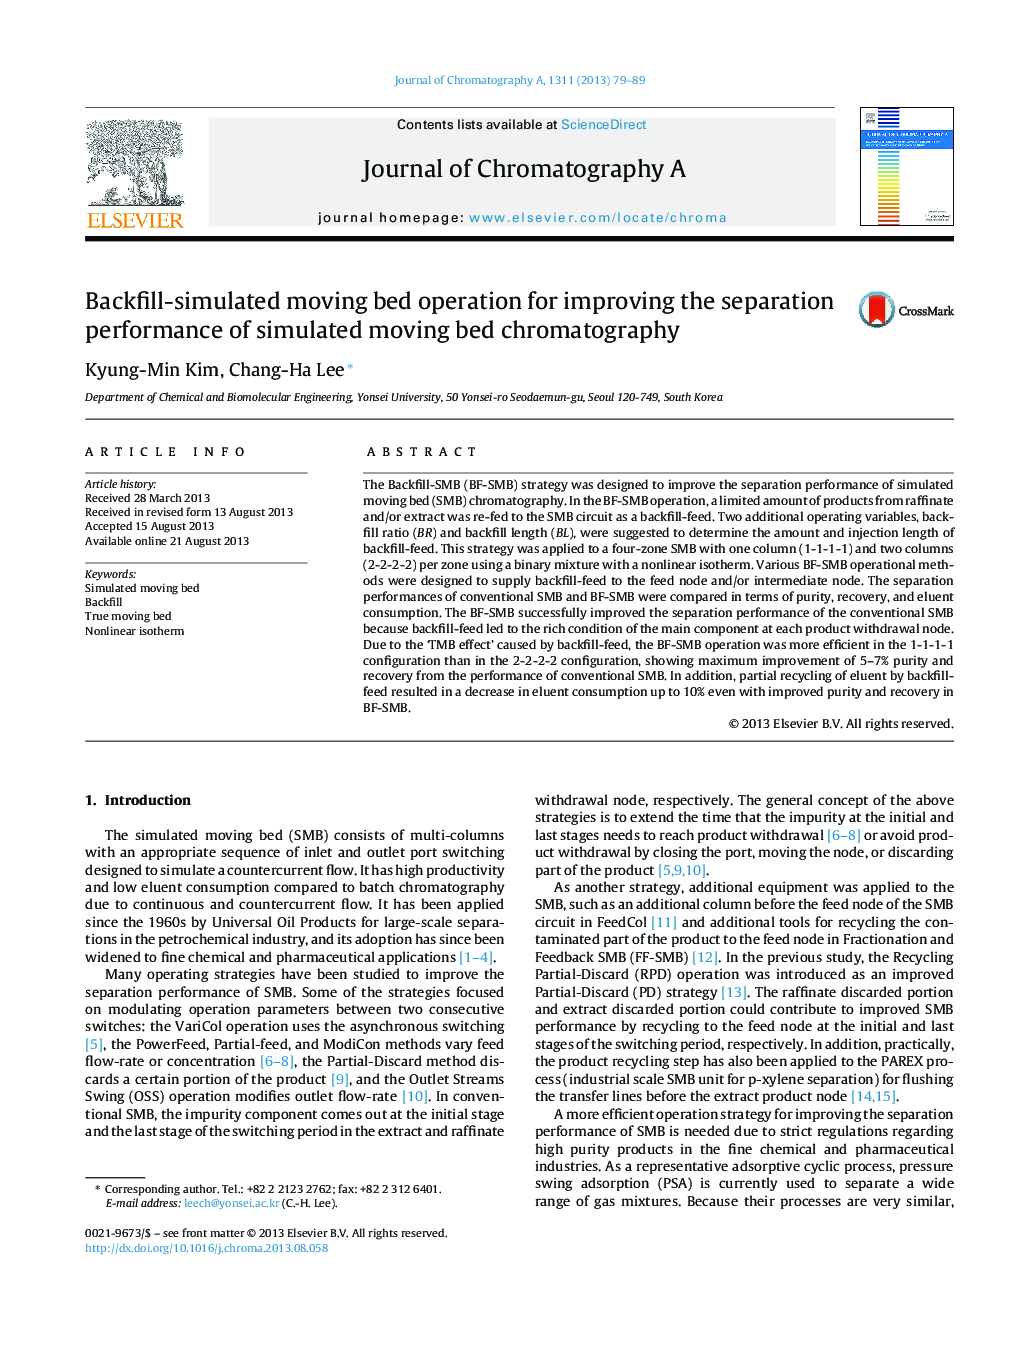 Backfill-simulated moving bed operation for improving the separation performance of simulated moving bed chromatography